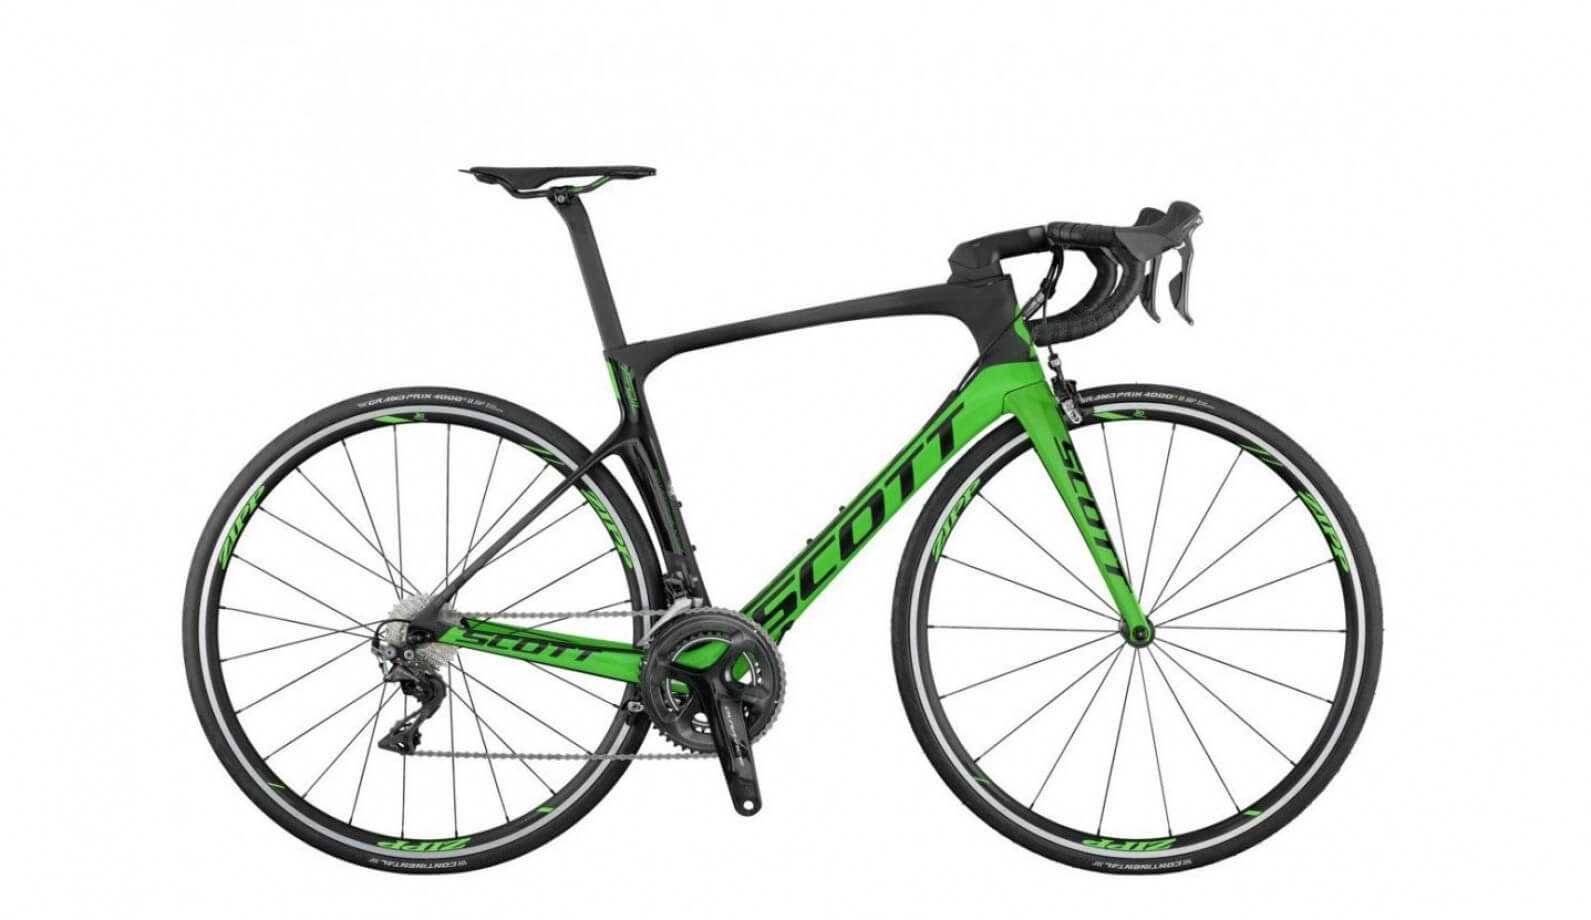 Thoughts on performance with the SCOTT Foil 2018